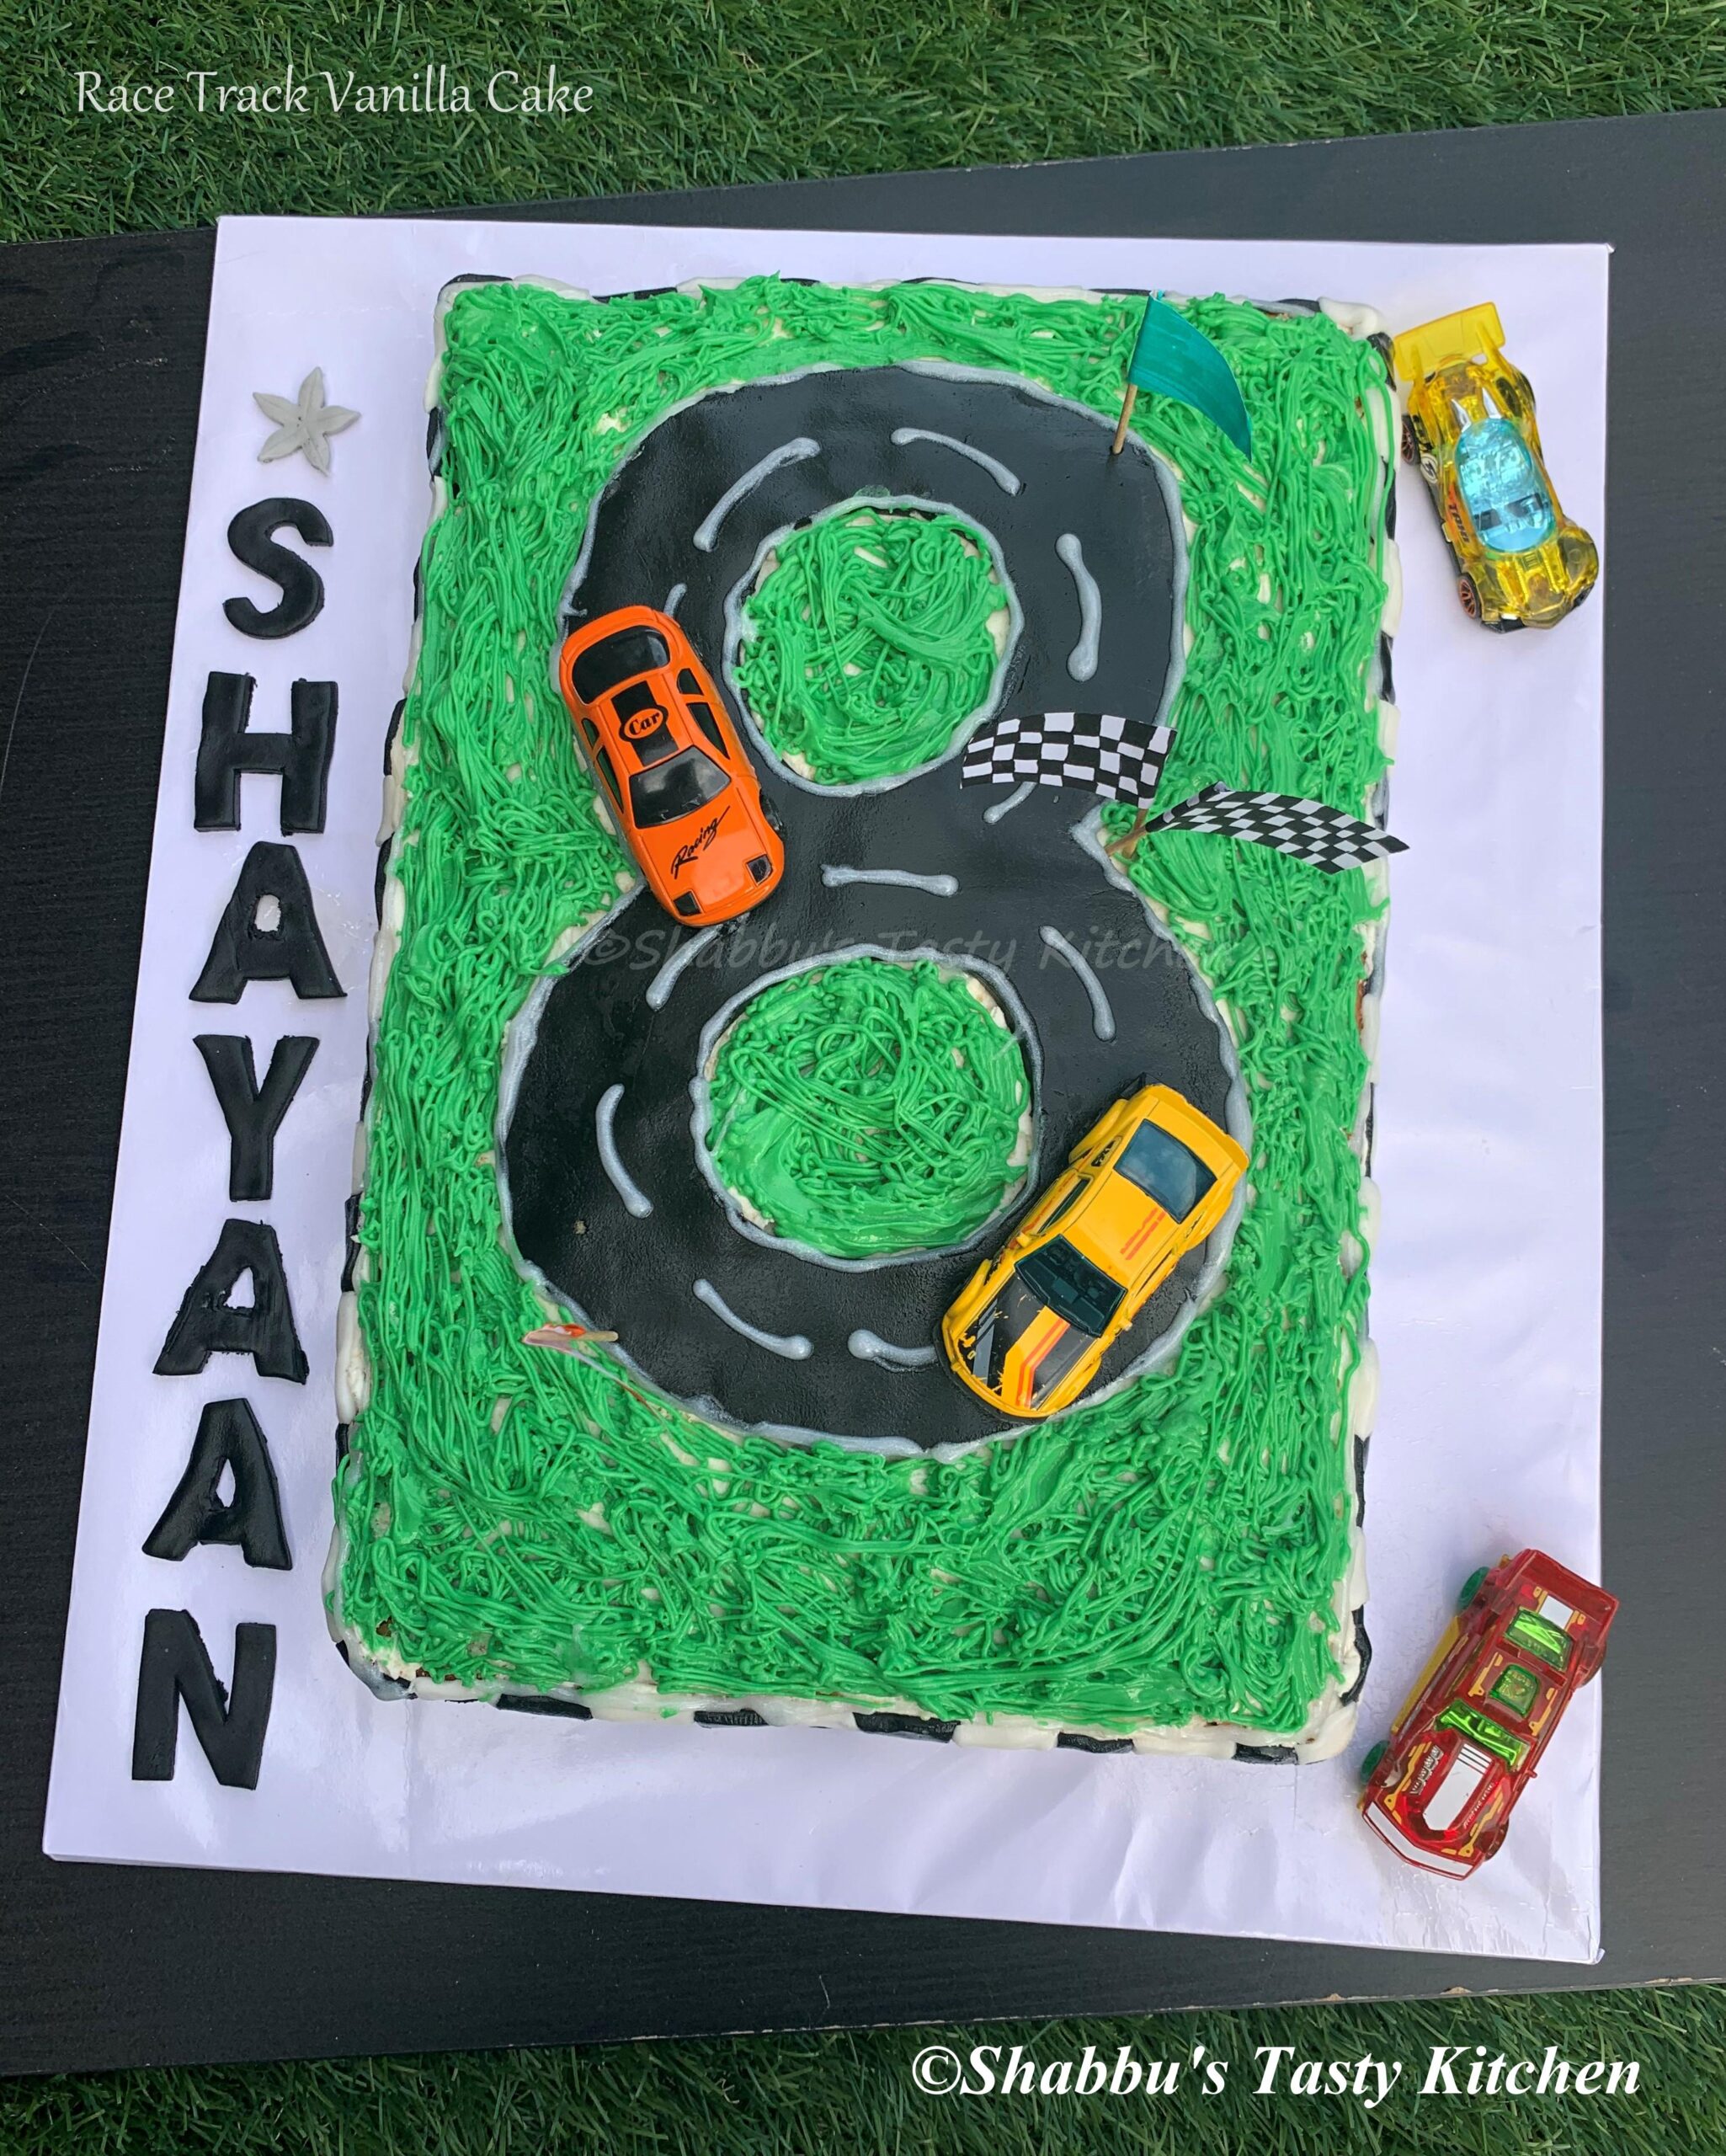 An 8-Track Car Cake – this nomad